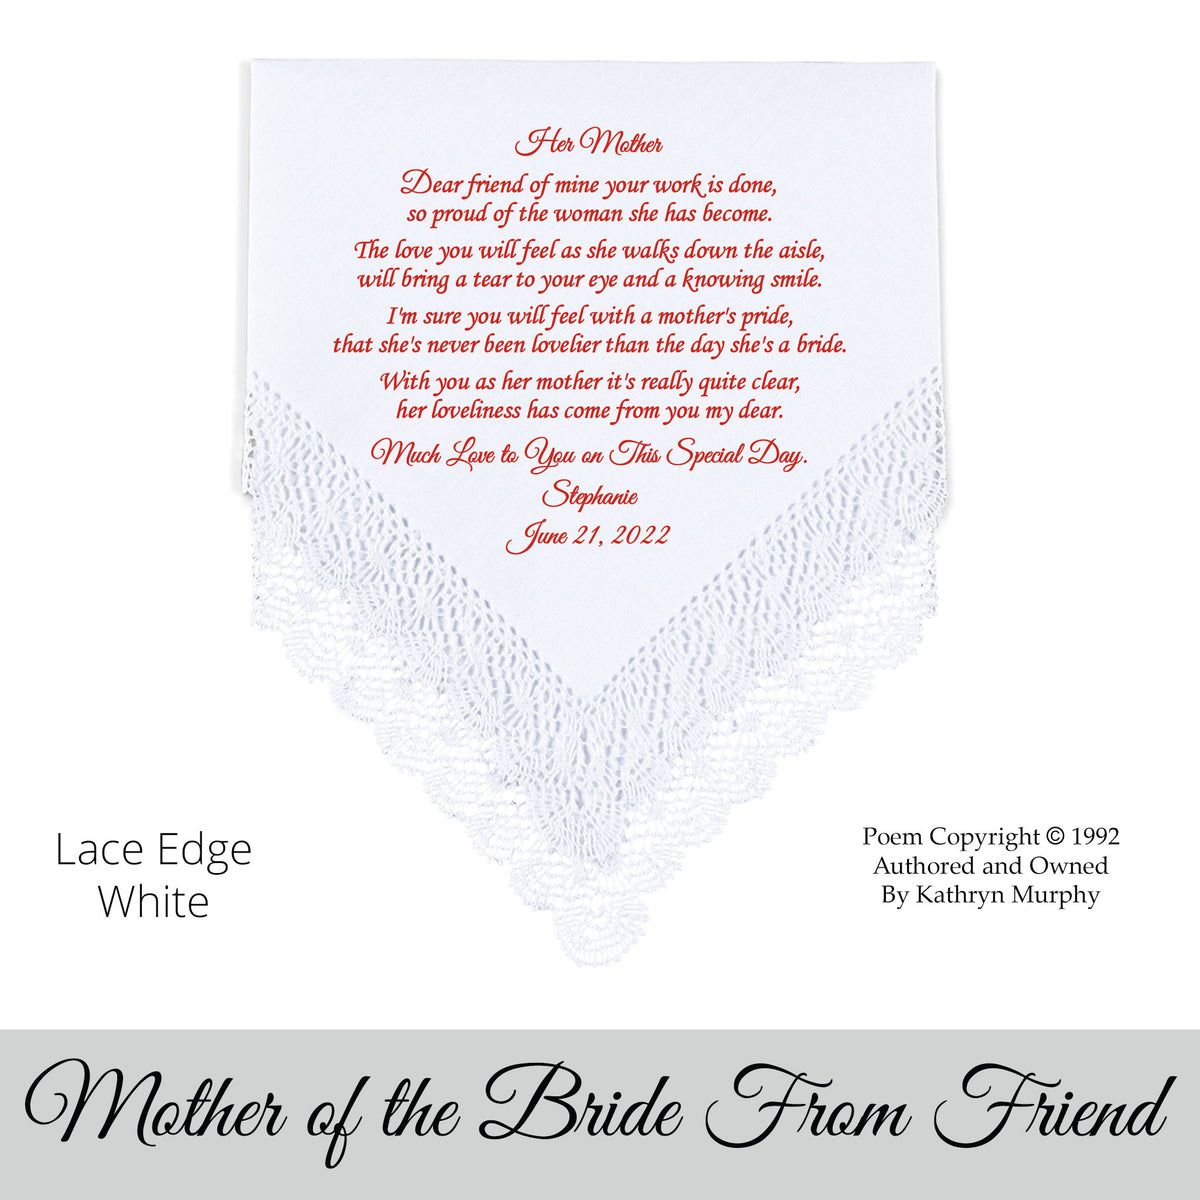 gift for the mother of the bride. Wedding Hankie with printed poem from her friend